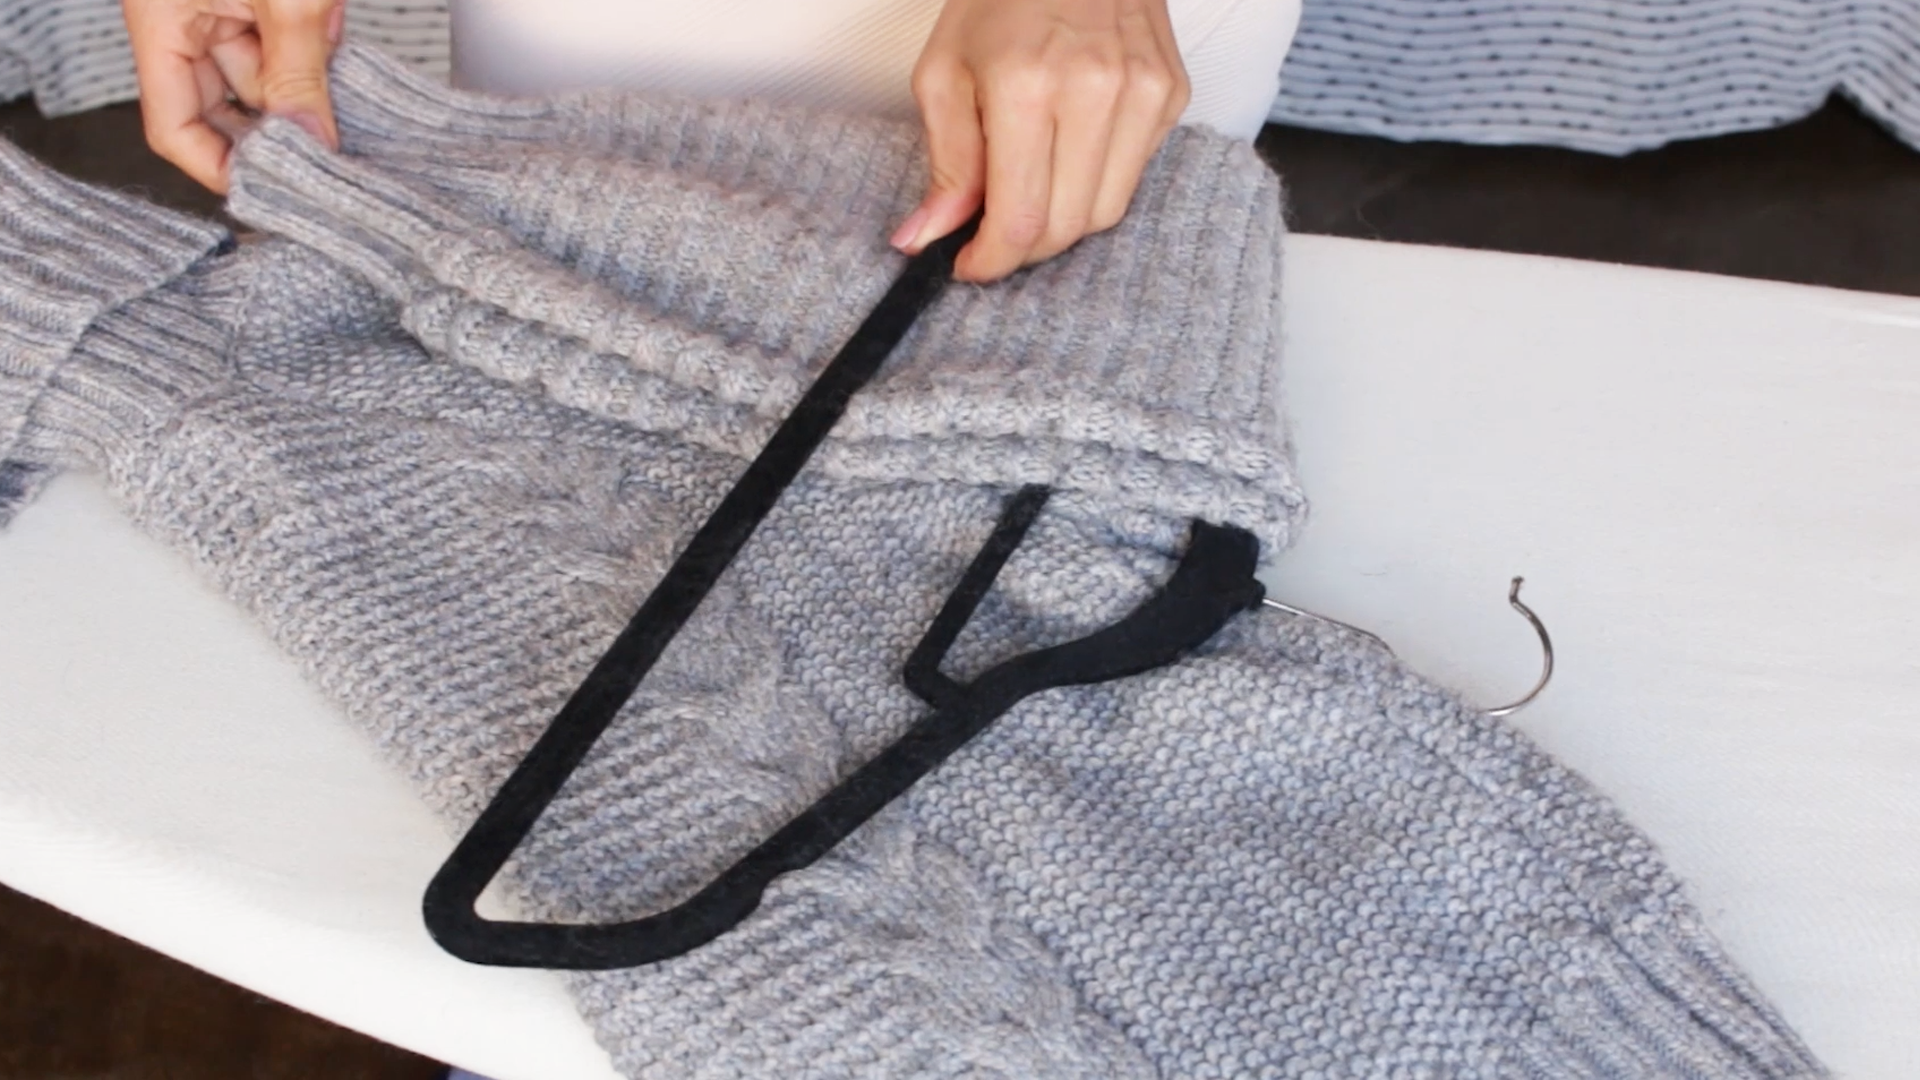 How To Fix a Snag In a Sweater With a Bobby Pin